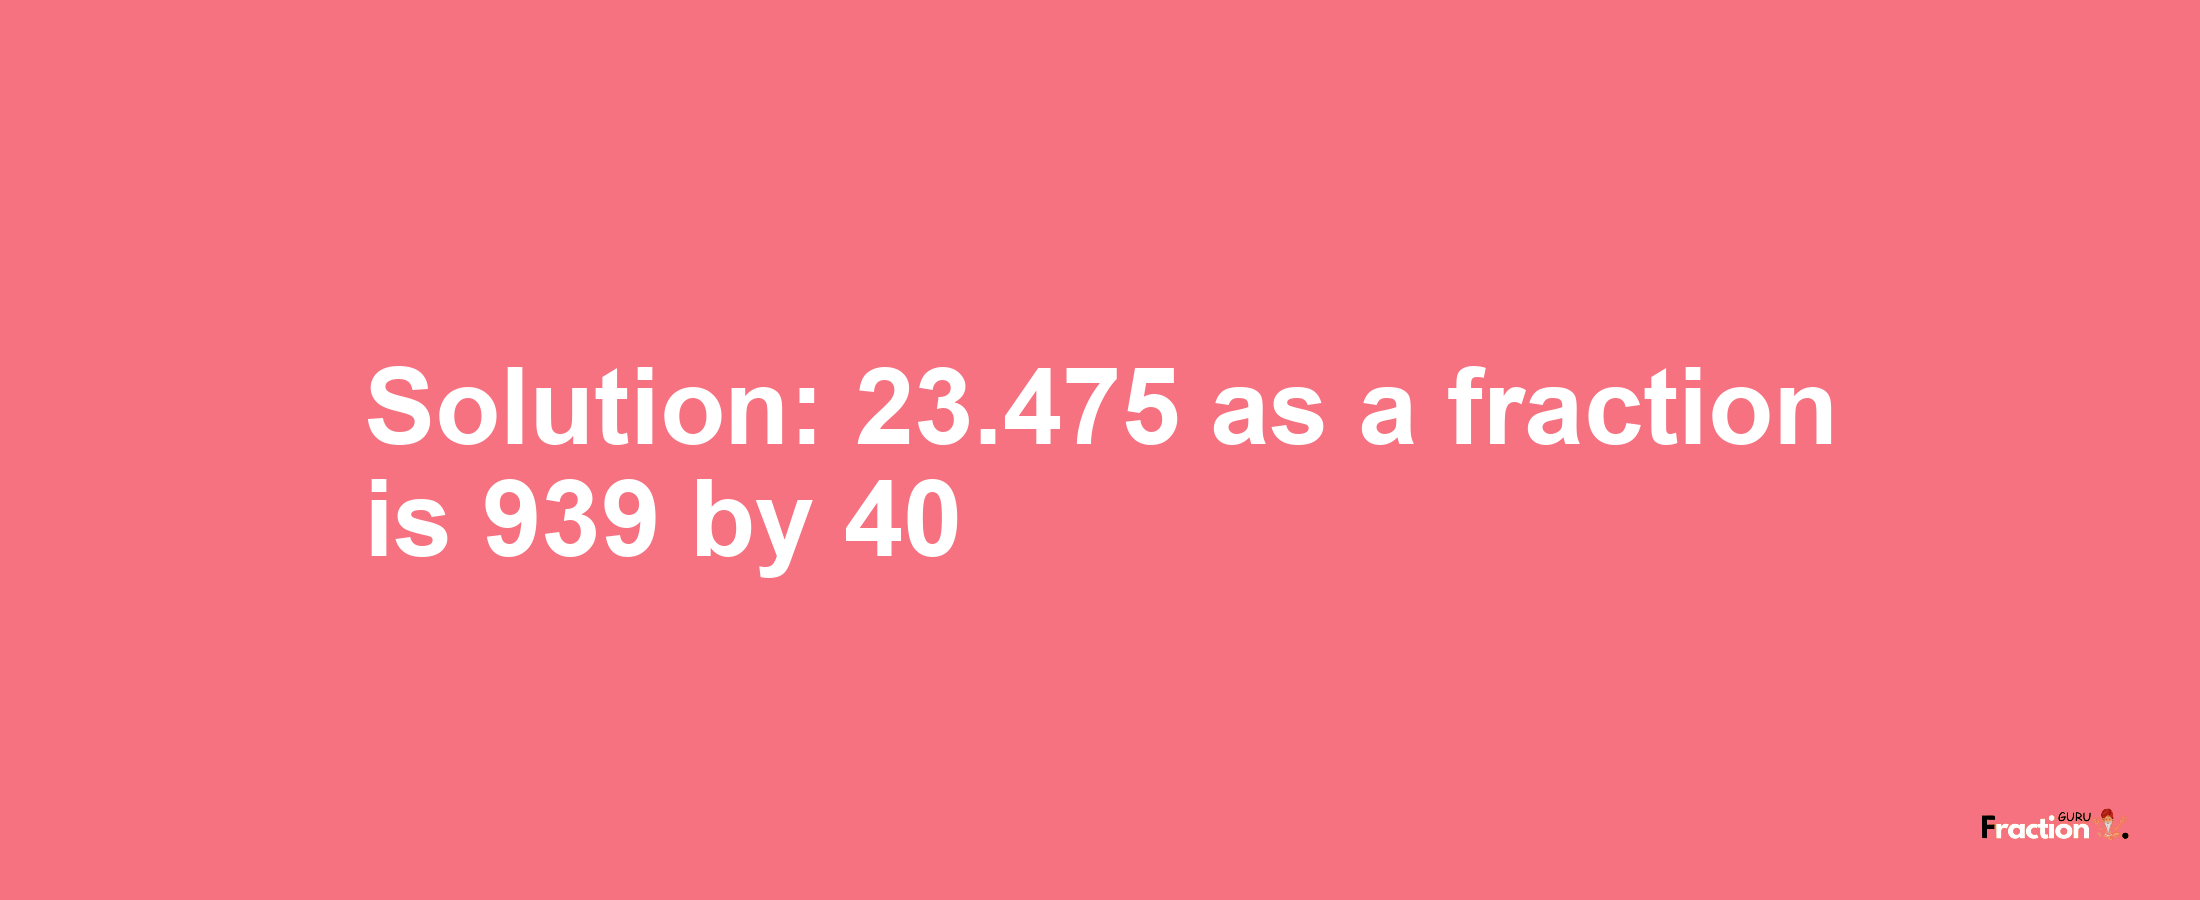 Solution:23.475 as a fraction is 939/40